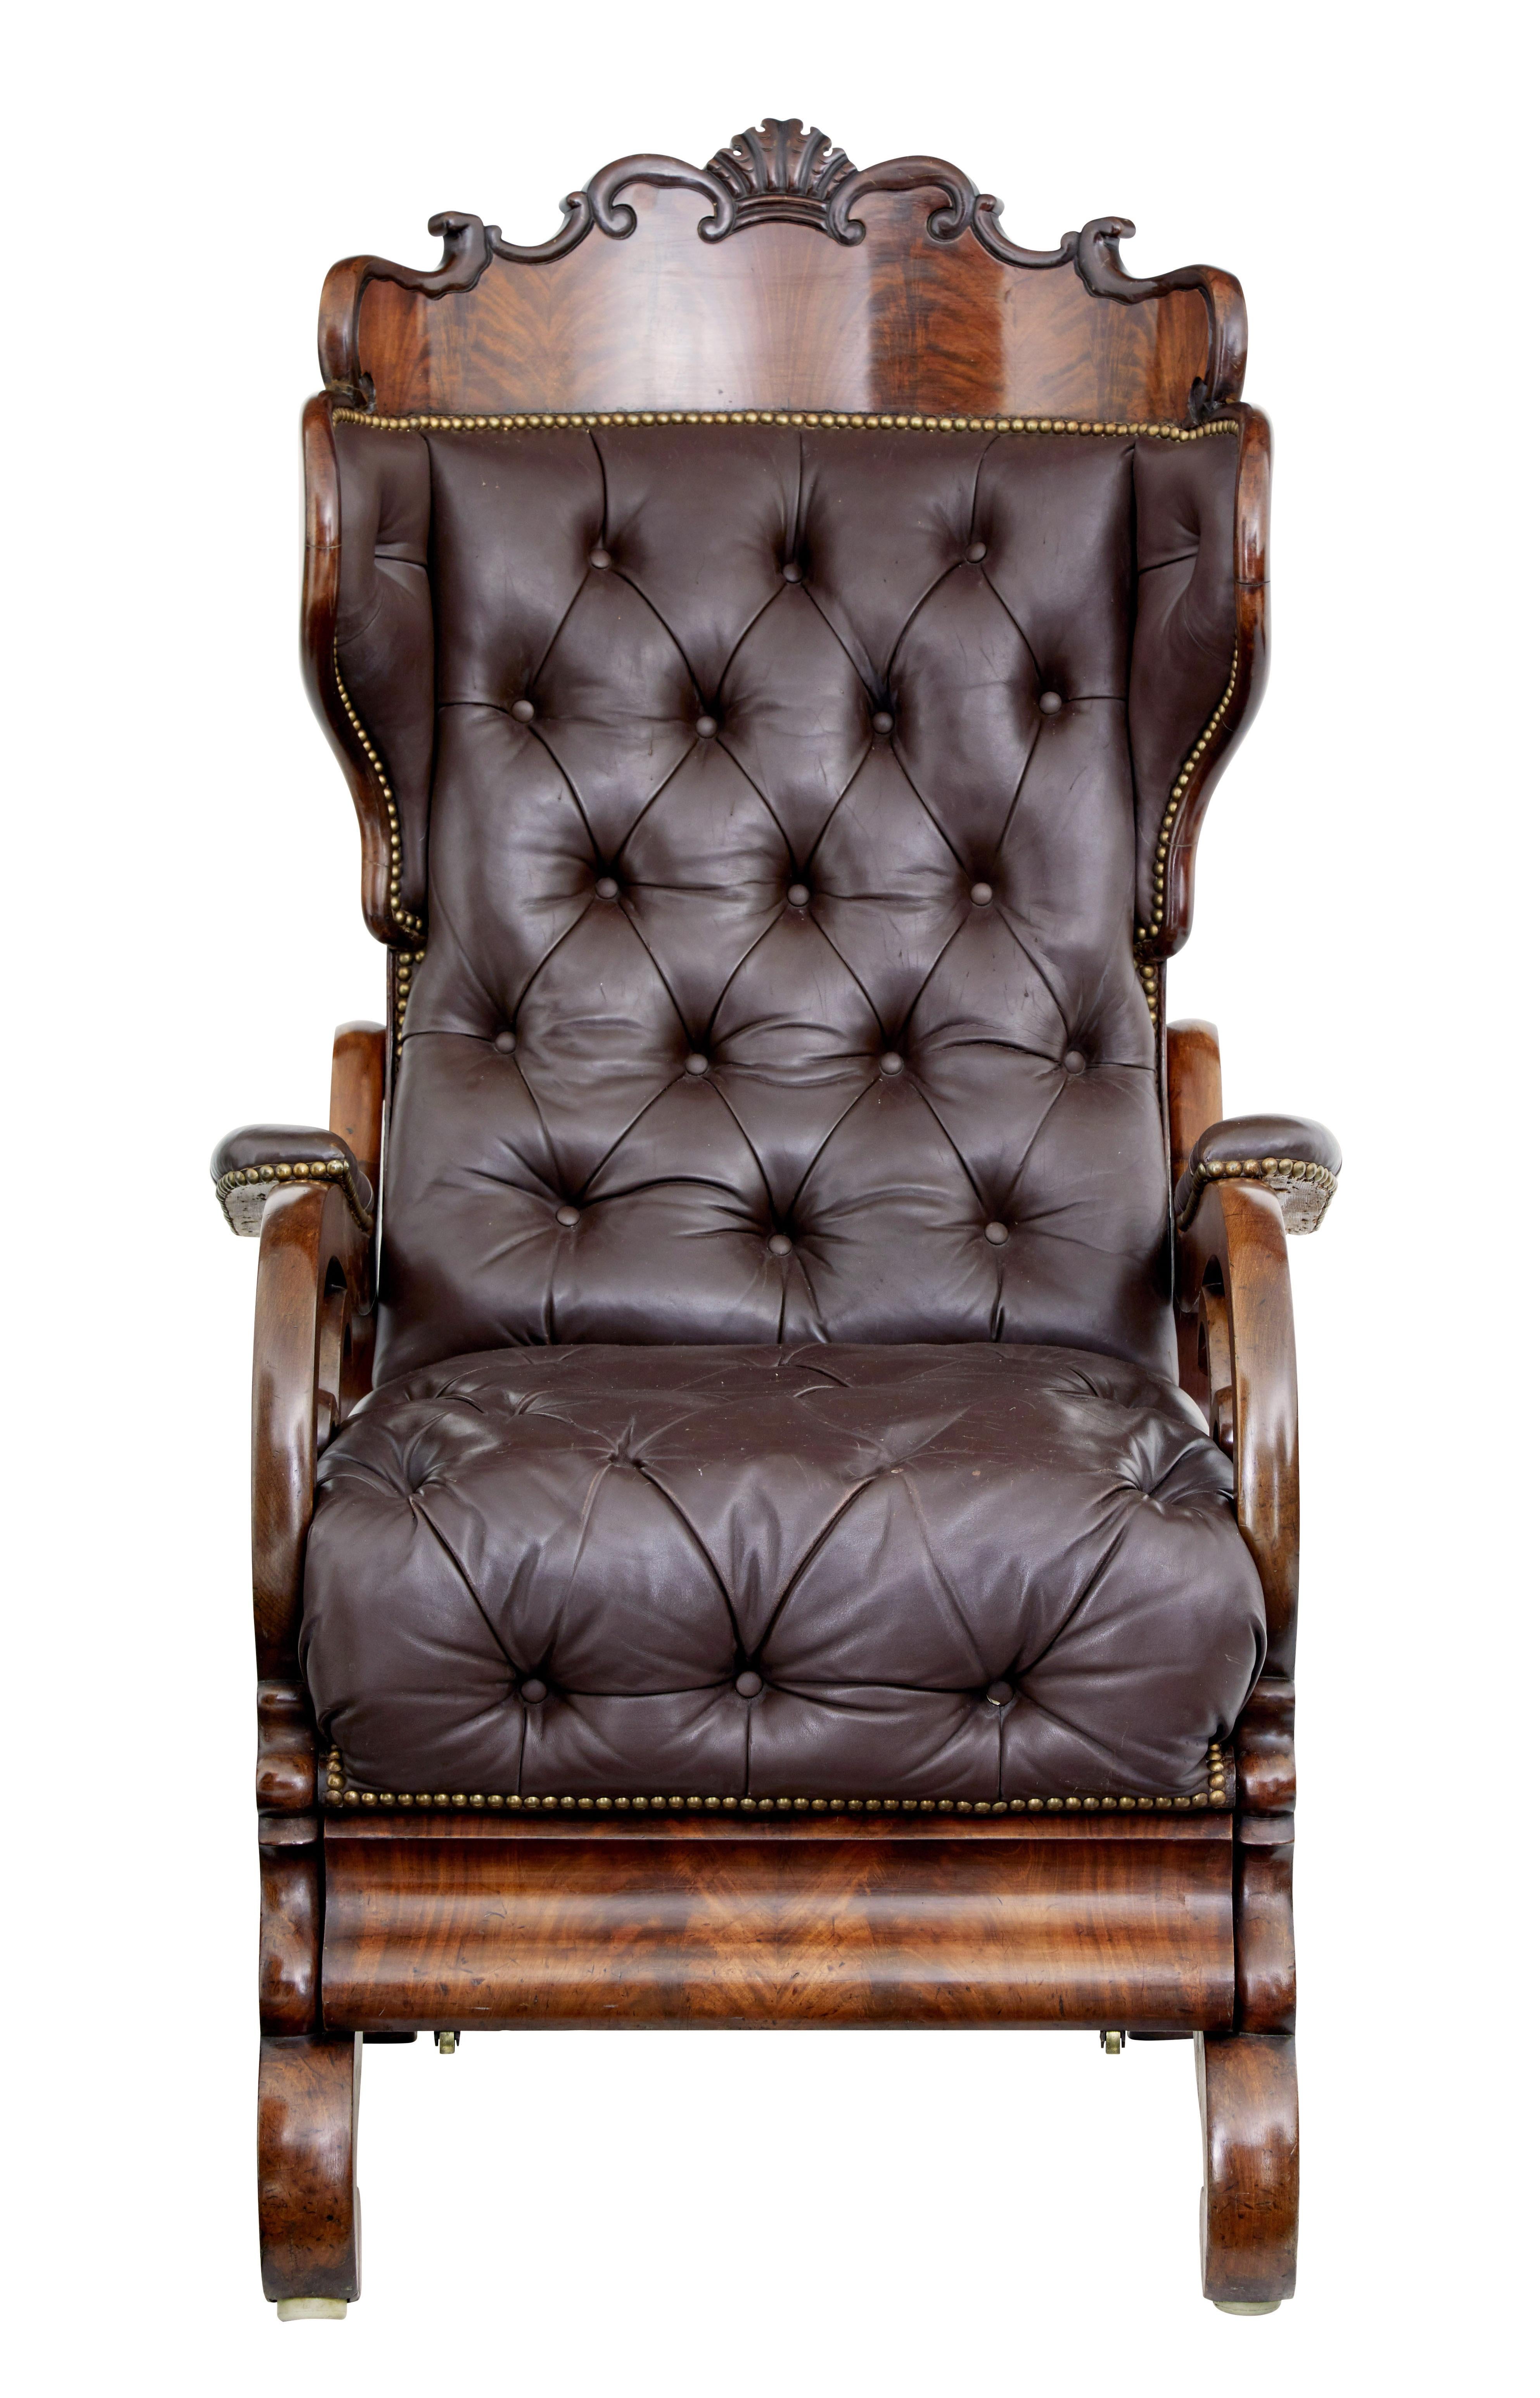 Mid 19th century French mahogany and leather reclining chair In Good Condition For Sale In Debenham, Suffolk